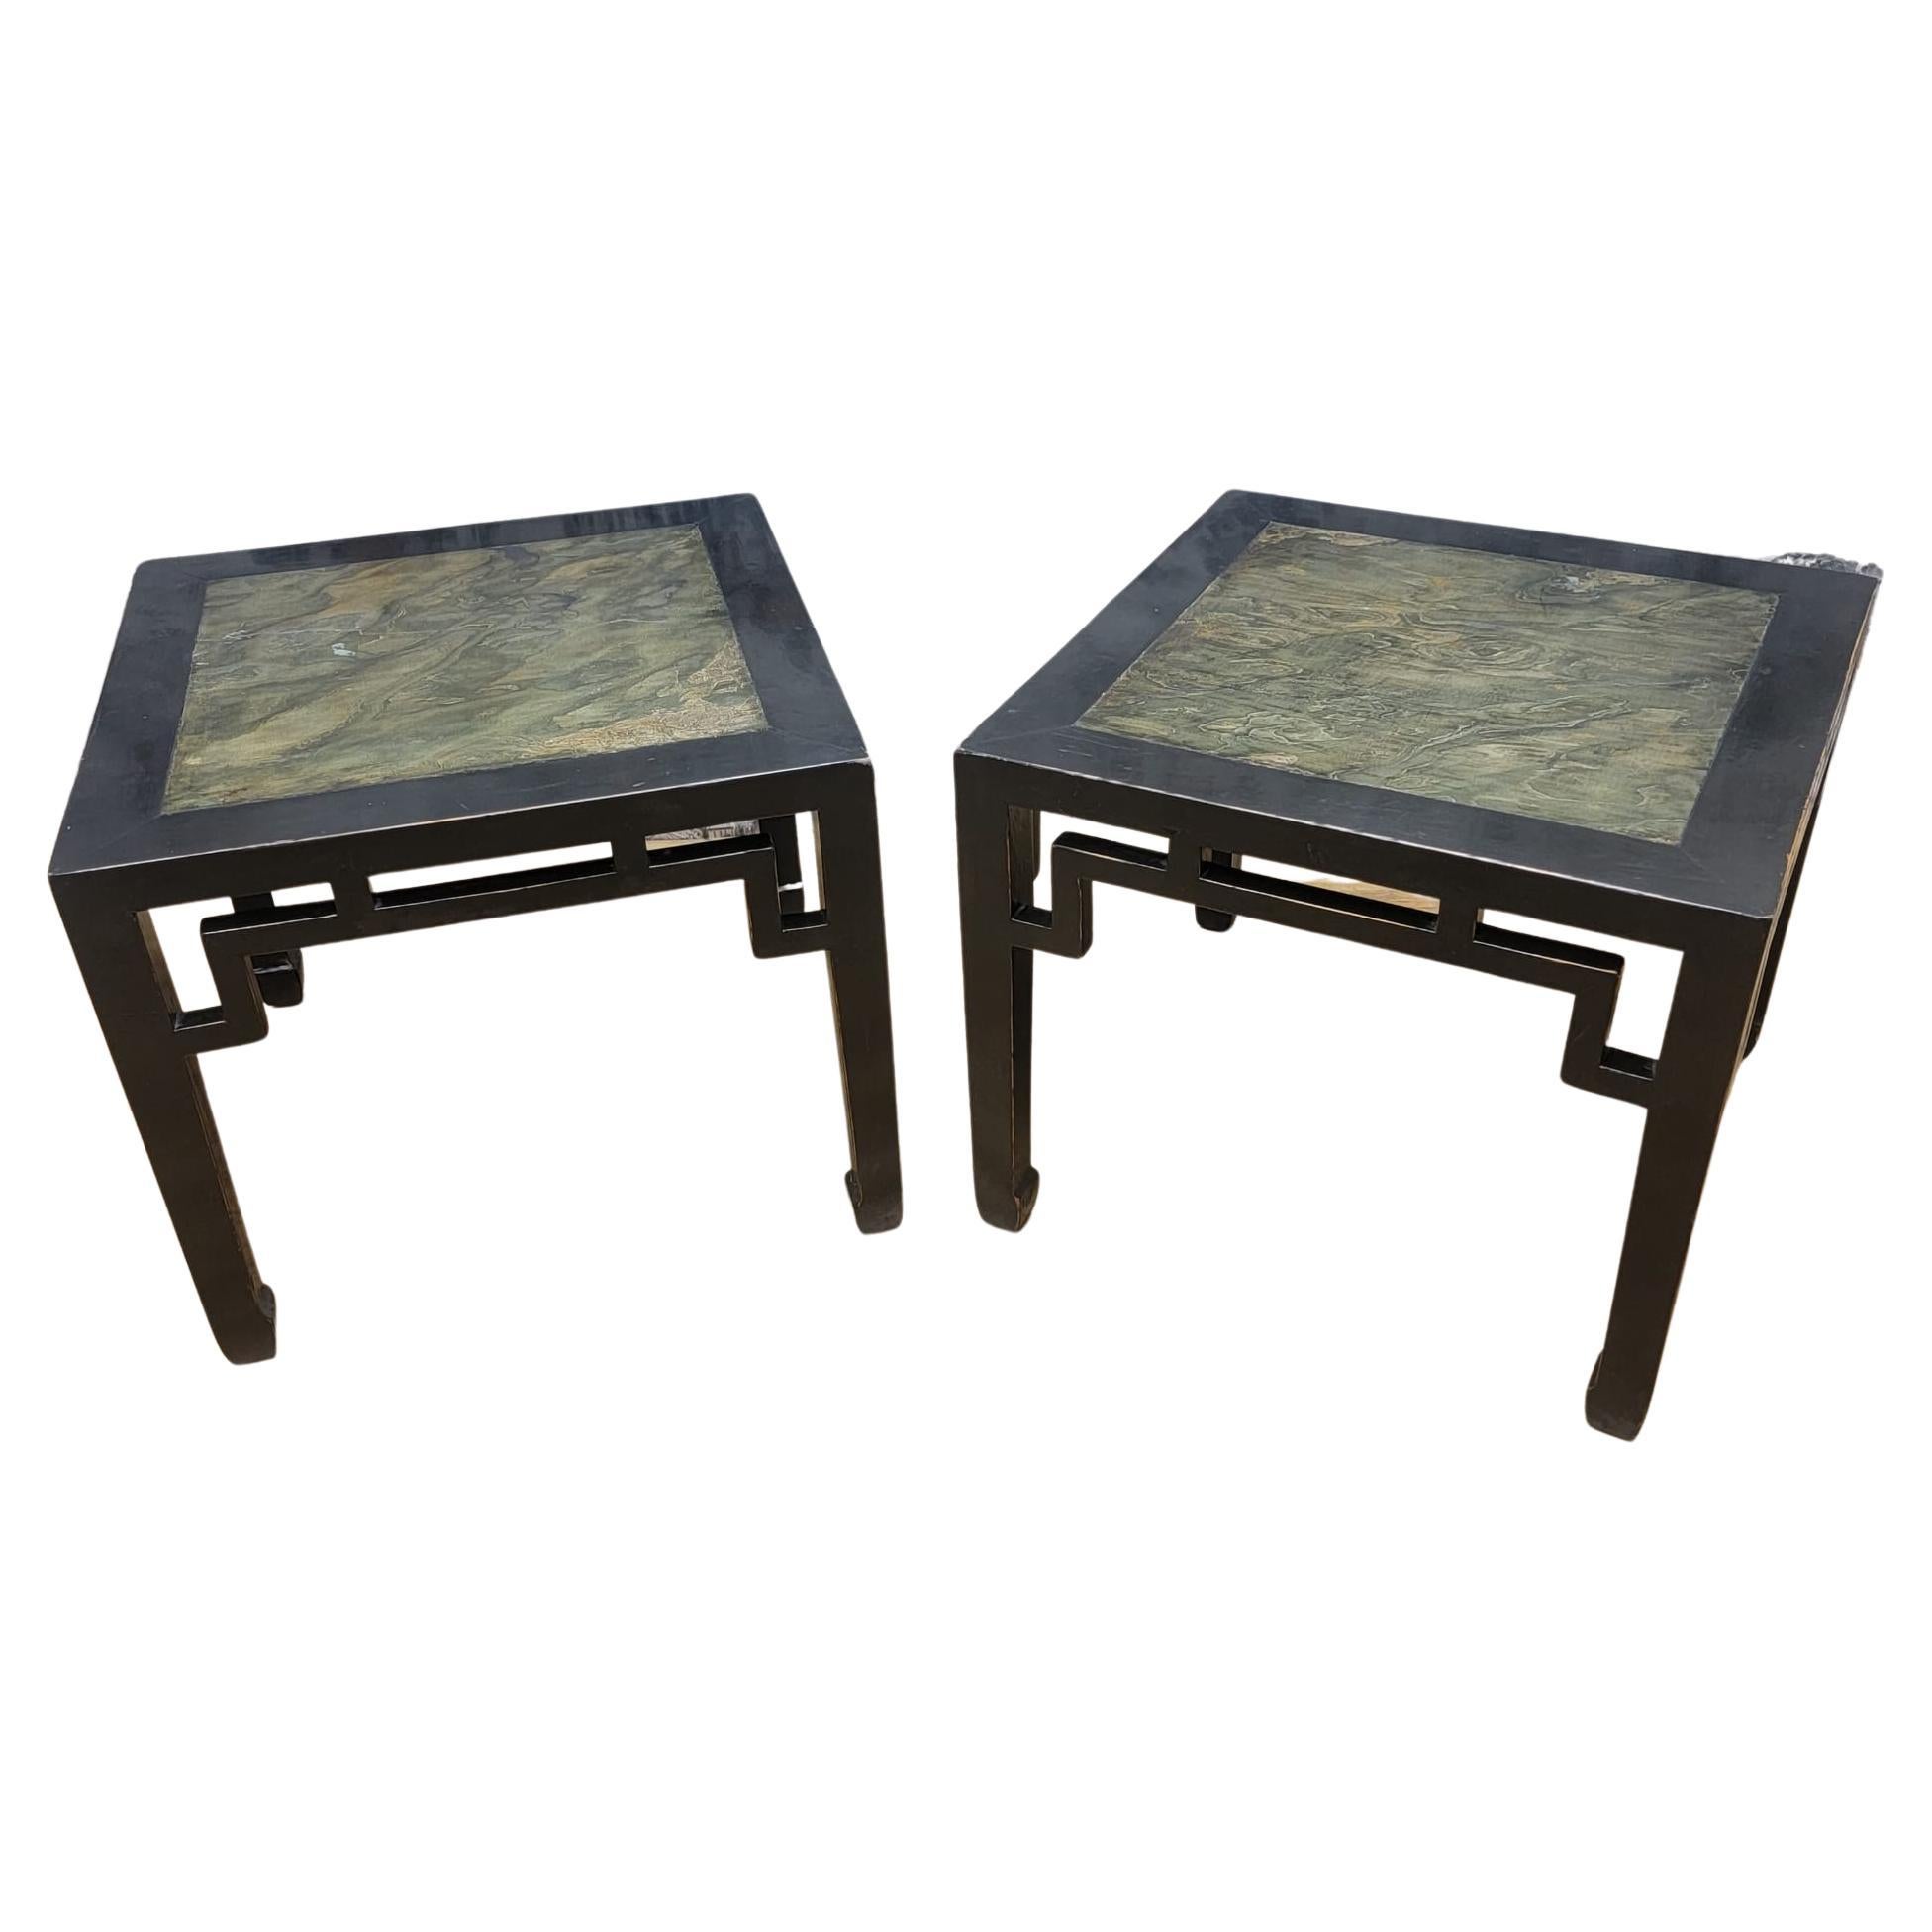 Antique Shanxi Province Elm Stone Insert Side Table, Pair